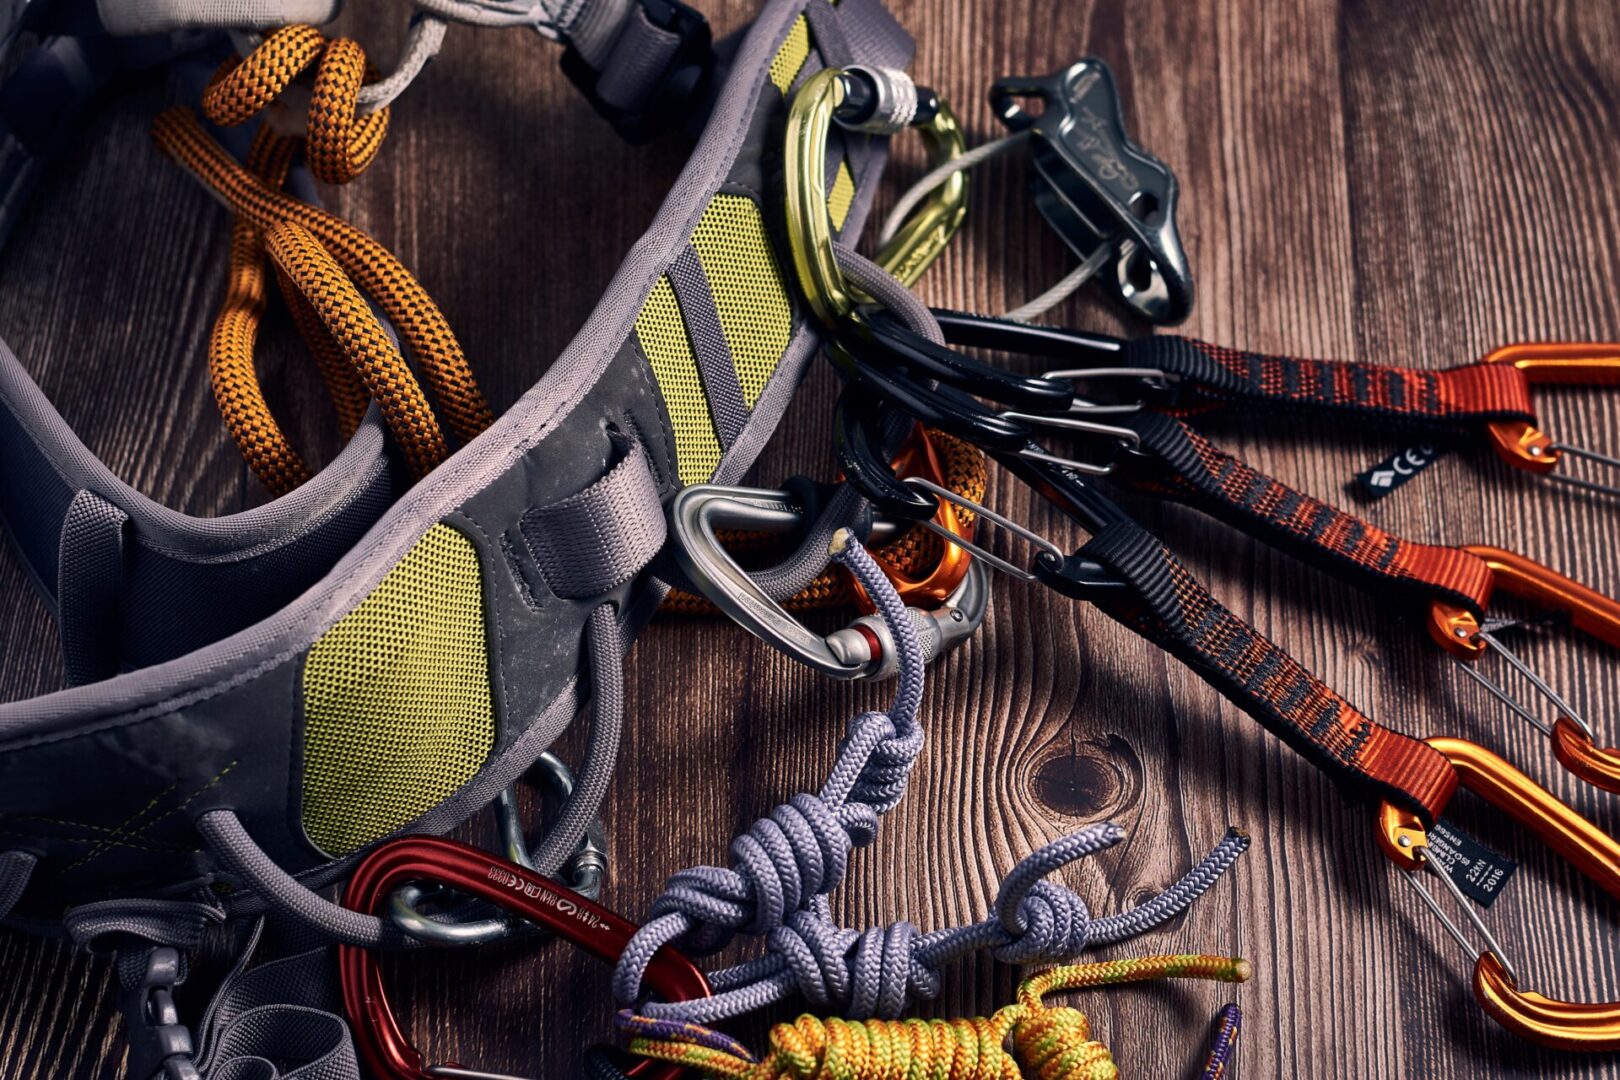 A closeup shot of many colorful climbing carabiners and knots on a wooden surface